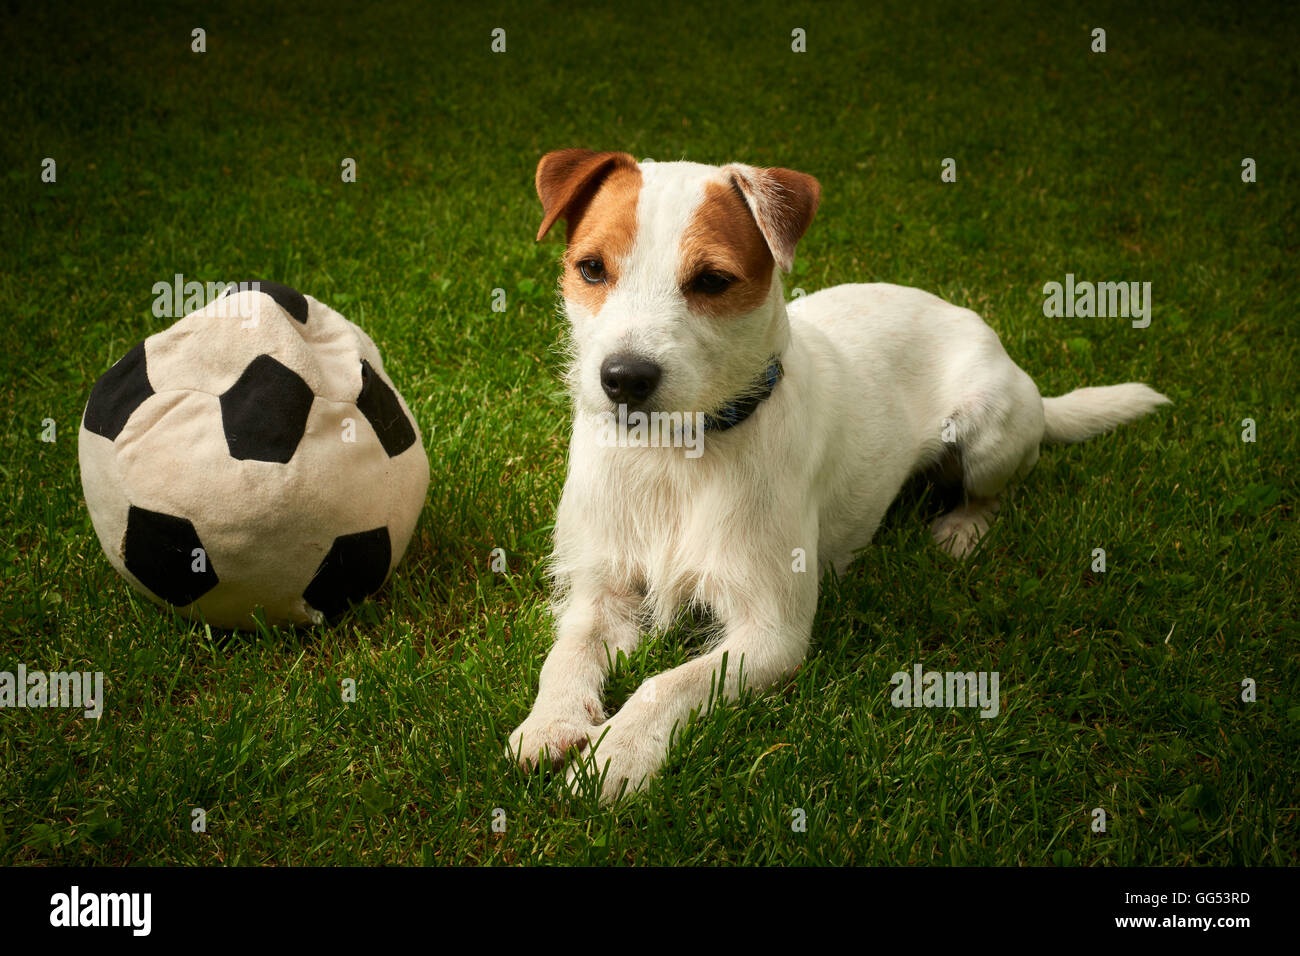 Jack Russell Parson Terrier dog playing with his toy ball Stock Photo